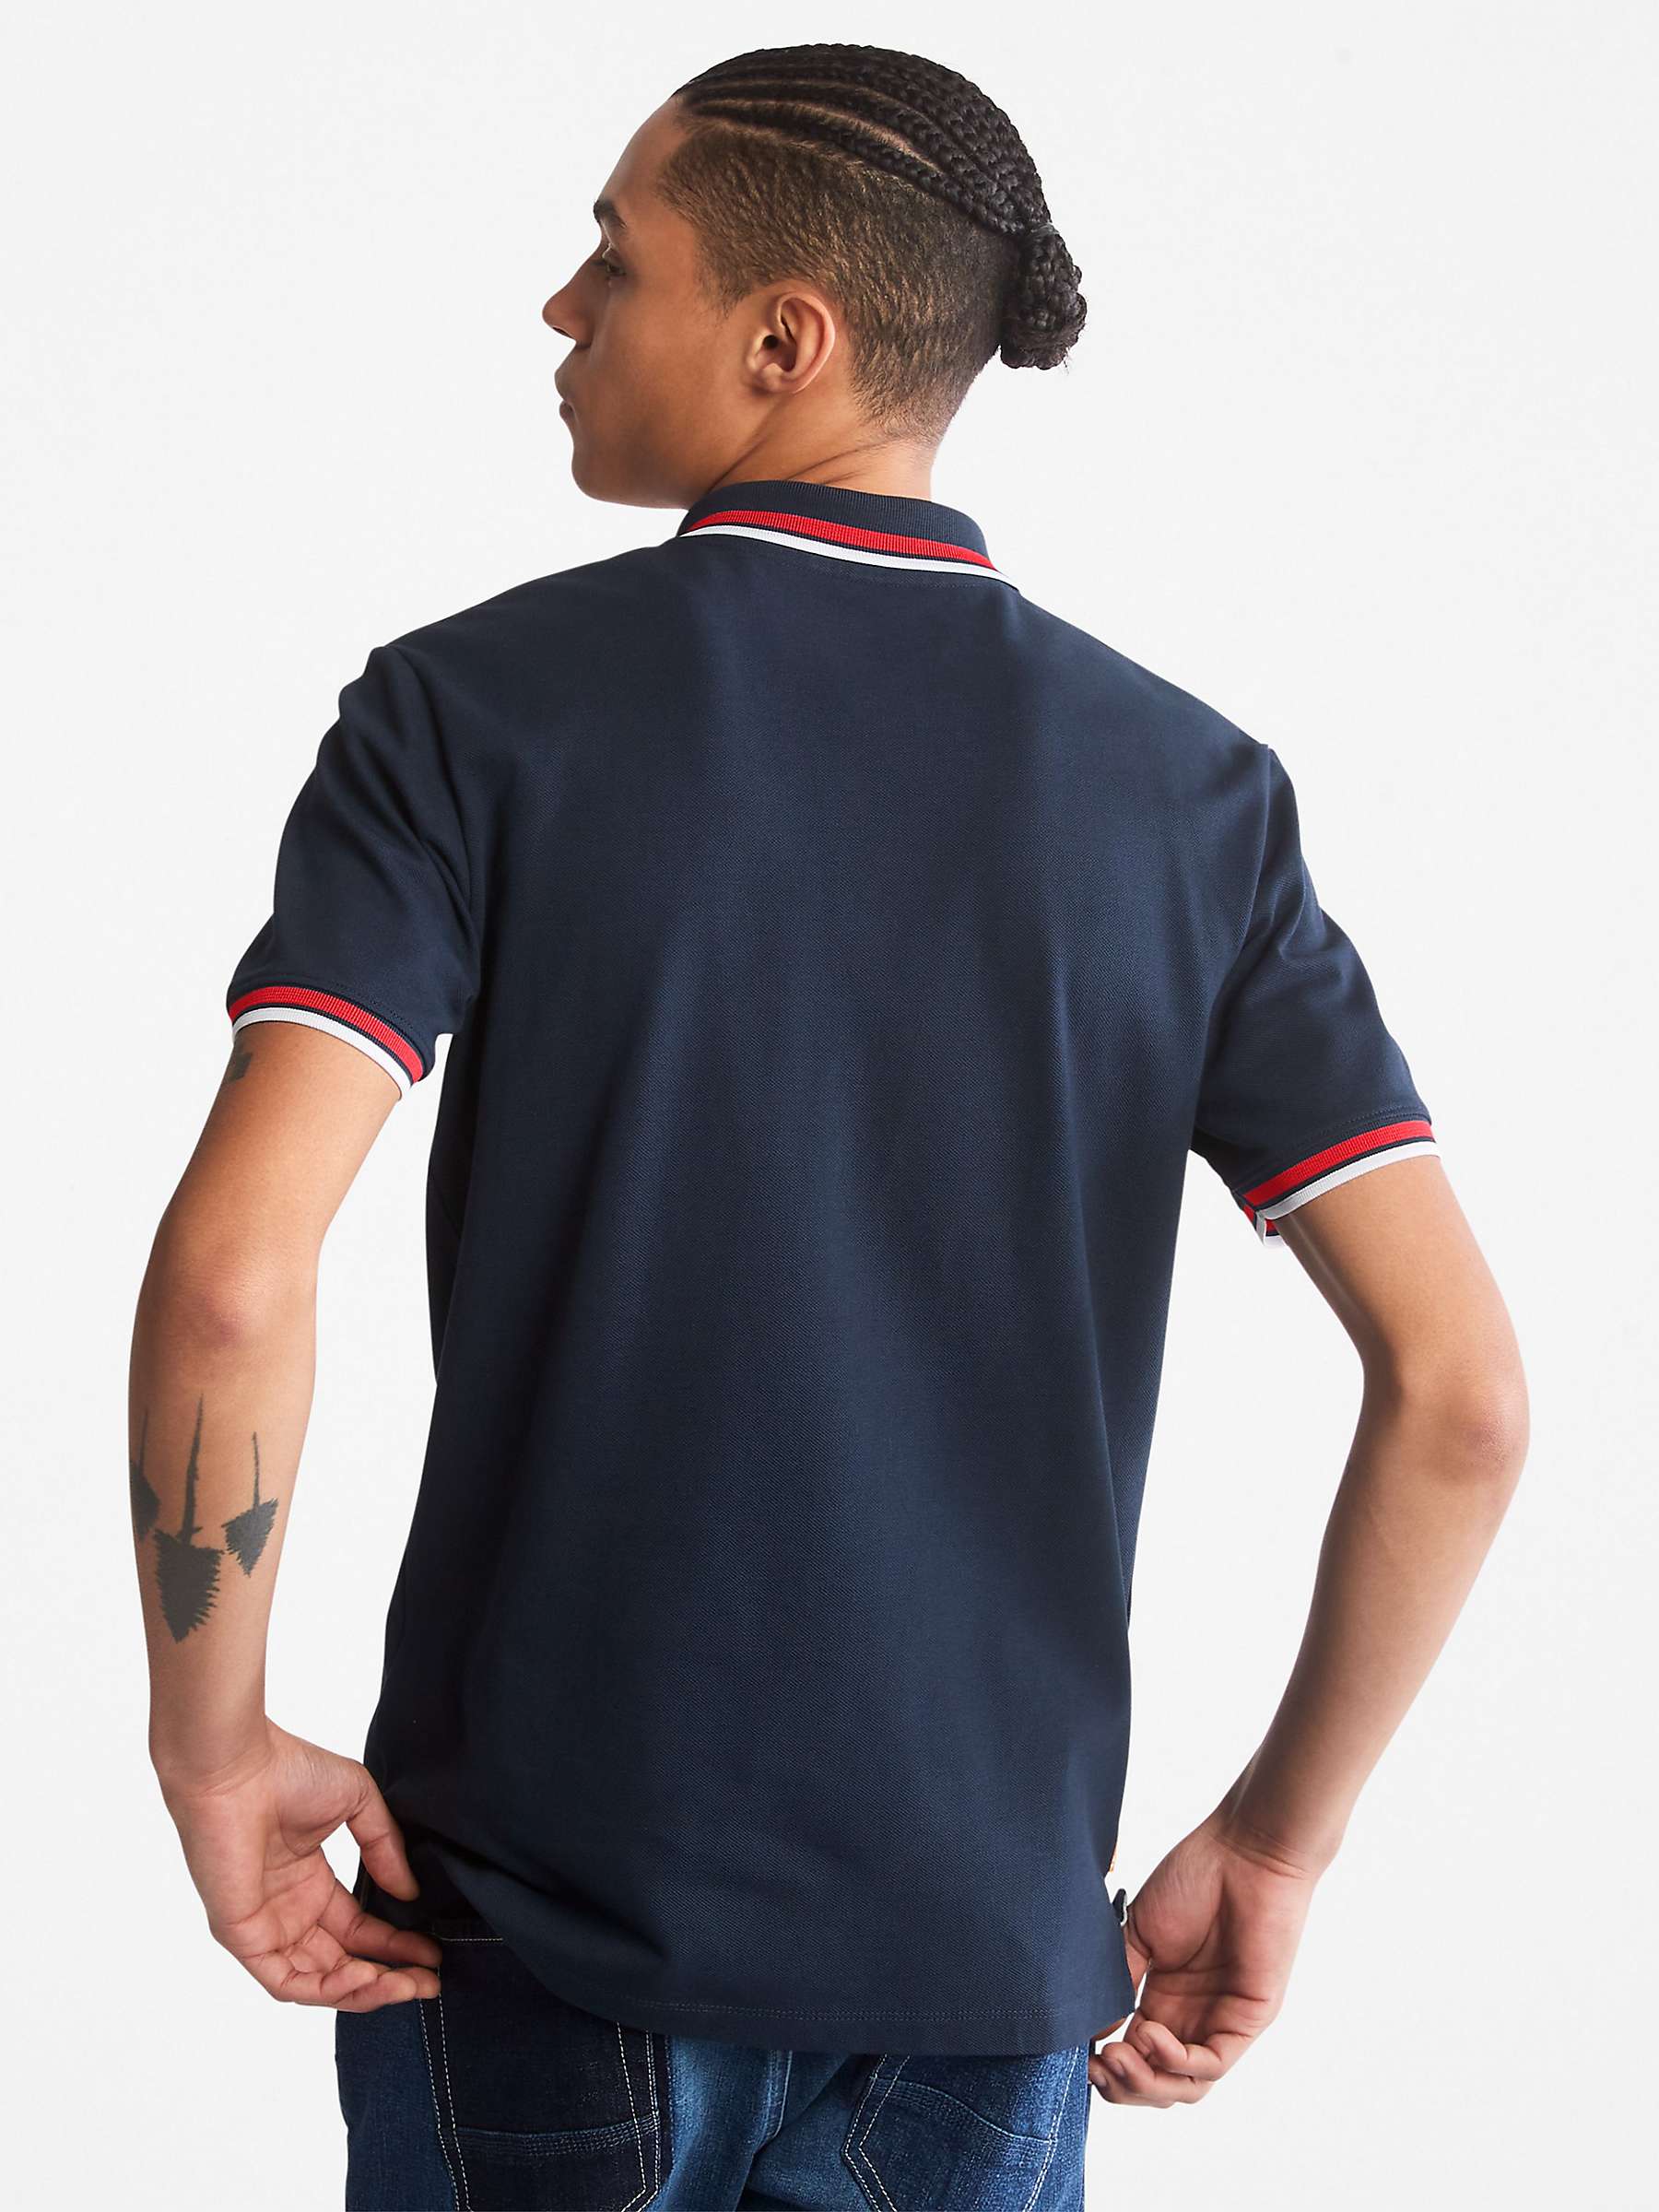 Buy Timberland Short Sleeve Tipped Pique Polo Shirt Online at johnlewis.com